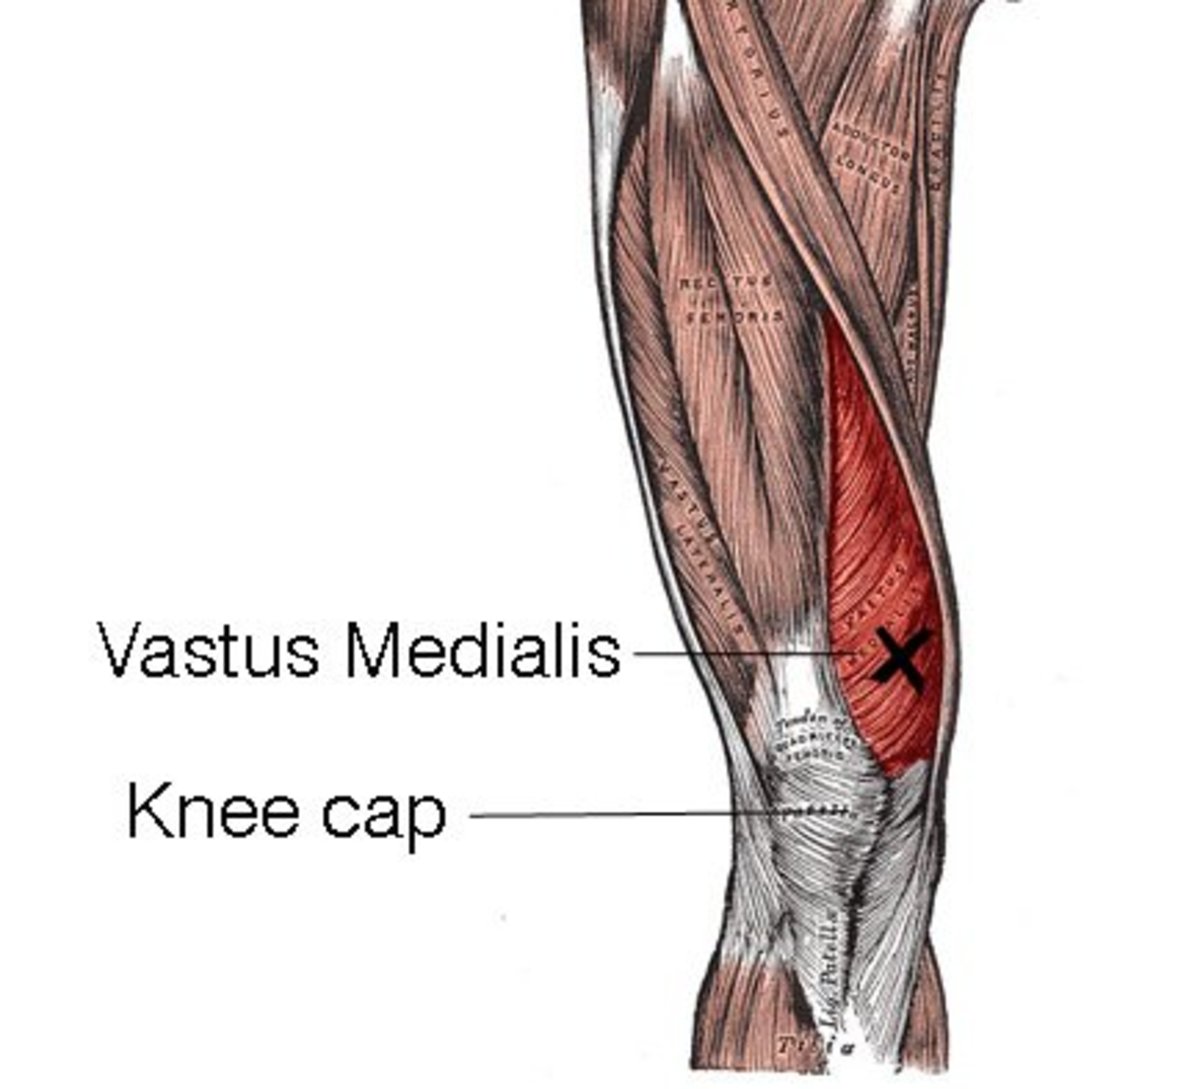 diagram showcsing the vastus medialis and how it protects the knee cap and stabilizes the knee joint